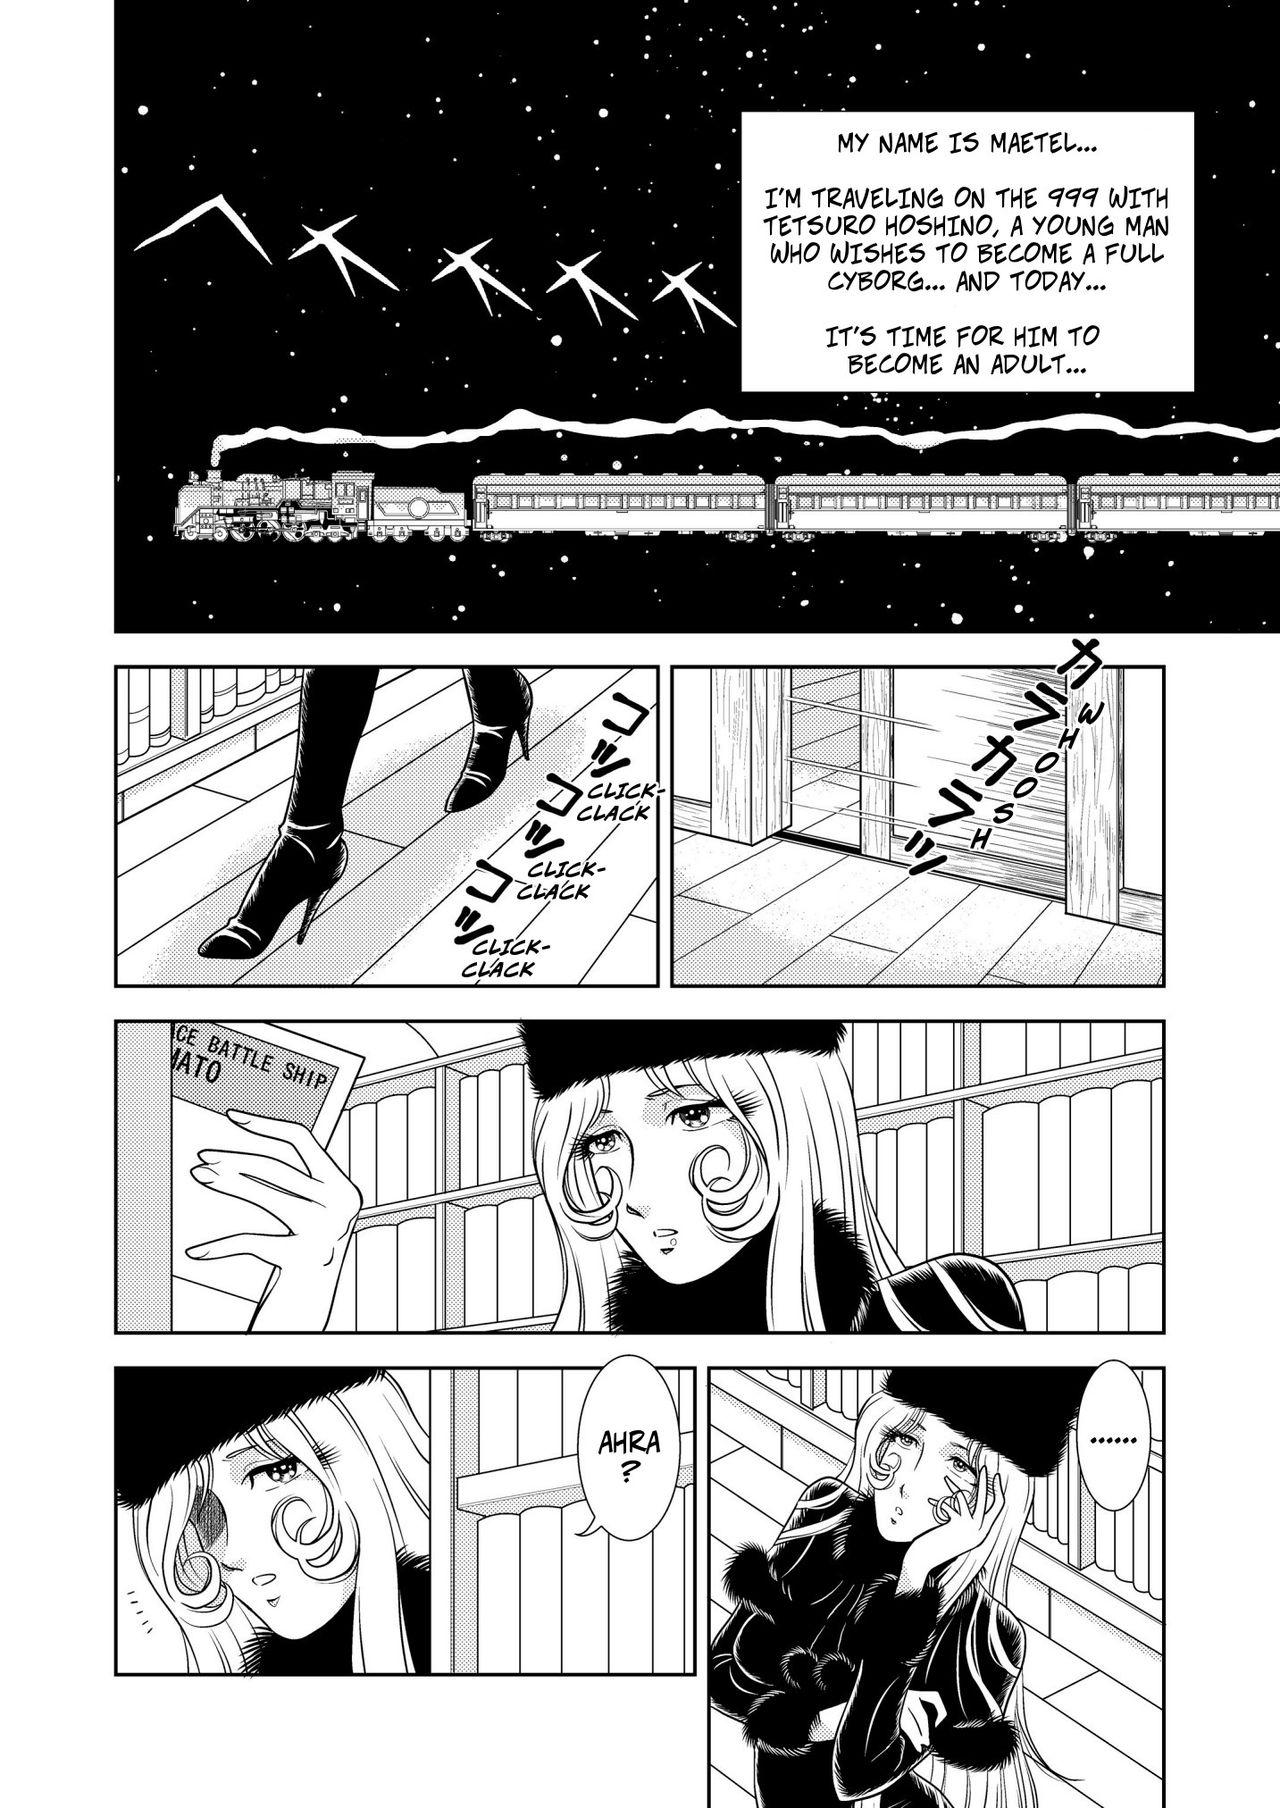 Goldenshower Maetel Story 2 - Galaxy express 999 Tight Pussy Porn - Page 2